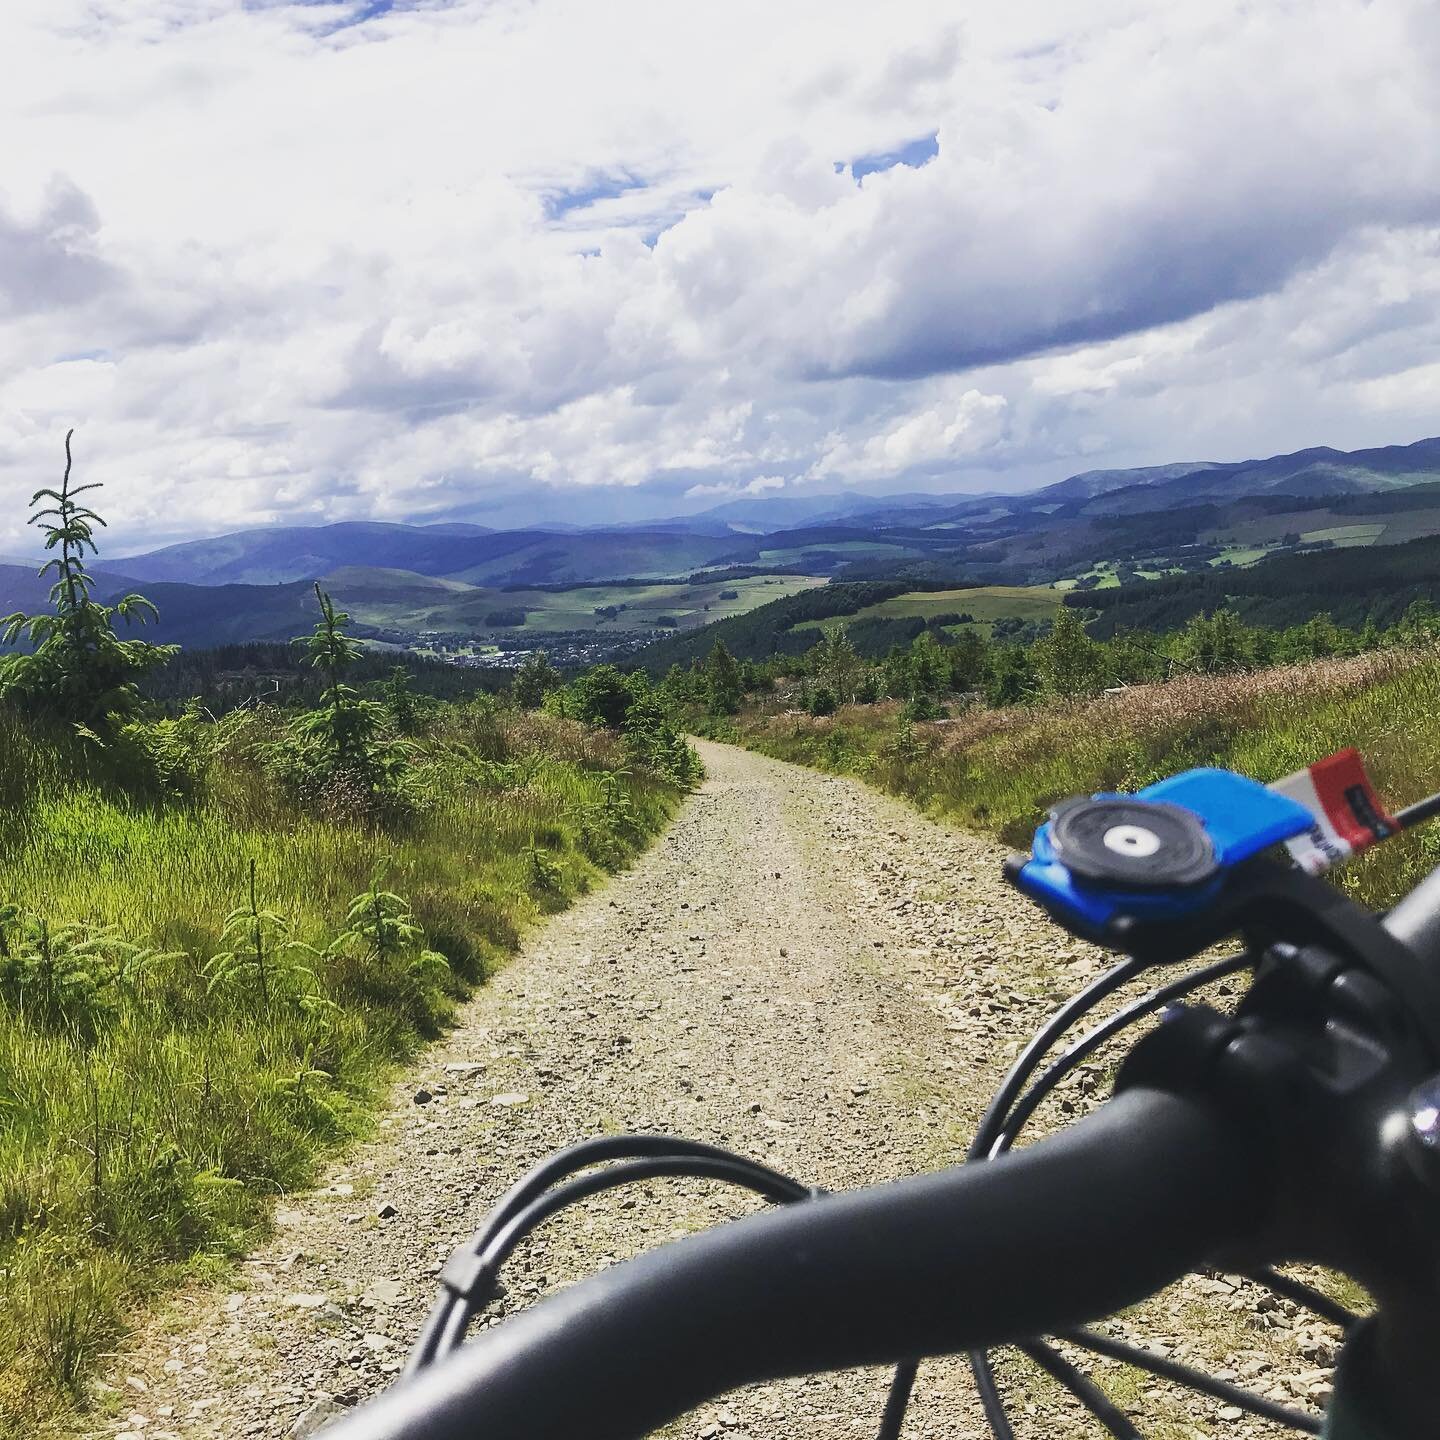 10 months after knee surgery, almost 11 months since I was last able to ride a mountain bike&hellip; if just on fire roads. Thanks to a good friend for lending me their ebike. #glentress #mountainbiking